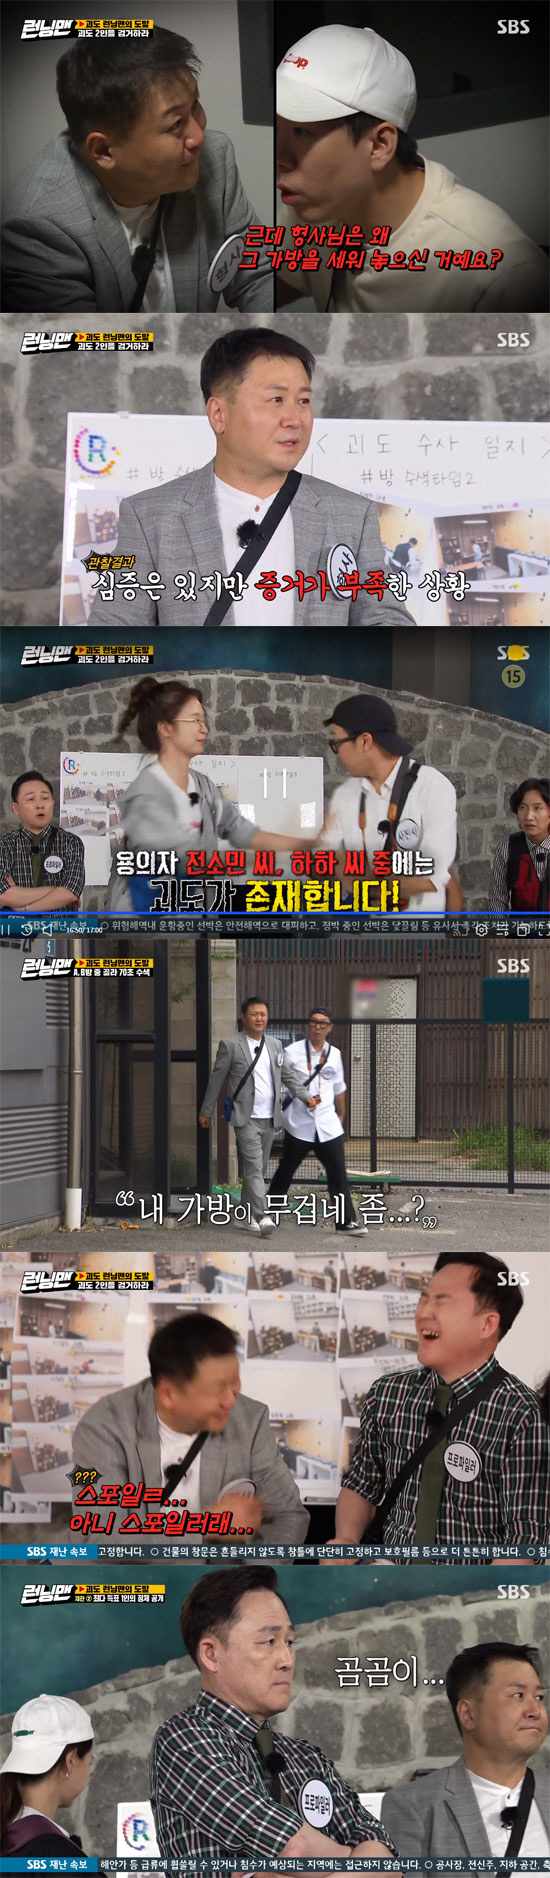 Citizen Running Man succeeded in Godo Haha, Jeon So-min reasoning.On the 6th, SBS Running Man was broadcast by Pyo Chang-won from 1st Generation Profiler and Yoon Seok-ho, the actual model of the movie Crime City Ma Dong-seok.The last 10th anniversary special feature, The provocation of the Goose Running Man, which became a hot topic recently, was a situation where imitation crimes were committed.Ghost Running Man is very important for role Choices as their ability varies depending on their respective roles. On this day, the members arrived first in the order of Detective, Judge, Prosecutor, Head Hunter, Security Officer, J.A.Martin Photographer and others have played Choices.The first to arrive, Jeon So-min, played hacker, while Yang Se-chan played Choices the audio director; Haha, who followed, played J.A.Martin Photographer, Yoo Jae-Suk was the prosecutor, Lee Kwang-soo was the interior expert, Ji Suk-jin was the headhunter, Kim Jong-kook was the security guard, and Song Ji-hyo was the judge.In addition, Lieutenant Yoon Seok-ho of the role of Detective and Pyo Chang-won of Profiler role appeared.When the two appeared, they were surprised to say, The real thing has appeared, and What if you take it so seriously!Pyo Chang-won said, I was reported to have been reported to have been involved in a crime incident. Yoon Seok-ho said, I am very nervous.Yoon Seok-ho, the former game director, said, It feels like Jeon So-min, he said, because you came early.Haha said, Jeon So-min is originally an over-examination.However, Pyo Chang-won also said, I doubt the somn who arrived too soon. Kim Jong-kook, who explains hard, raised doubts that I do not have to make excuses like this.The two gangsters would have been Choices for a job, Pyo Chang-won explained for three reasons.So, the two people were divided into to tear and to put together.Pyo Chang-won is a Profiler job, where you can watch and hear all the members entrance and exit scenes and comments; the first room Caught in the Web has begun.Jeon So-min and Song Ji-hyo choices the room with scissors and rocks.Yoo Jae-Suk, who was paired with Yang Se-chan, said, If I do goblin, it is like an amateur to Choice the room here.Kim Jong-kook, who was paired with Kim Jong-kook, said, Maybe the killer is going to go to the real room.Lee Kwang-soo, who knows the real room, choices room A without hesitation.The first Montage Mission is a mission that requires a specific person in the filming site to be selected as a target, and a sketch of the target described by the PD is drawn and the target must be accurately found.Jeon So-min asked to express the face of the target with fruits or vegetables, and PD replied, Slightly spacious mango, a little big eye, thick eyebrows, no glasses, there is a little toilet.In particular, the members of the question destroyer Jeon So-min, who did not ask the right questions, raised the eyes of doubt.As a result, Yang Se-chan found the sketch of Yoo Jae-Suk.In the subsequent mission, Where is the person who looks like this? The members complained about the picture of the dungsong sketch, but they were surprised to find the production team boasting a high synchro rate, saying, It is a proof photo.In addition, the PD replied, The shape of the upper pumpkin, and the members said, So is Lee Kwang-soo? And It is a pumpkin that has passed the expiration date.A room at a certain time discussed the picture of Caught in the Web.Kim Jong-kook, the unofficial investigative chief of Running Man, continued to question the current Detective, Yoon Seok-ho, without hesitation, saying, What was the reason for acting like that? And What did you want to find out?The members laughed, pointing out that Kim Jong-kook is also true to Detective.Lieutenant Yoon Seok-ho, who had a suspected one-person interrogation right before the first trial, headed to the interrogation room with Yang Se-chan.Yoon Seok-ho said, There is a part of the coast, he said, Why did you designate the role to other performers?However, Yang Se-chan asked, Why did you put up a bag? After the interview, Yoon Seok-ho said, I have a heart attack but I do not have enough evidence.In the first trial, the test Yoo Jae-Suk raised Jeon So-min and Haha with suspicion, and the result was that the goose was existent among them.After completing the second room Caught in the Web, Yoon Seok-ho said, My bag is heavy, he said, Is this funny?The gangsters stole 100 jewels after the second Caught in the Web.Lieutenant Yoon Seok-ho, who watched the pictures at a certain time, suspected Pyo Chang-won, and Pyo Chang-won explained with a embarrassed smile.The second-inning vote found that the most votes were for Jeon So-min; the trial-launched Jeon So-min was found to be one of the goons.The members who went to the last room in the Web shared information about the weight of each bag, and when we weighed it, Lieutenant Yoon Seok-hos bag was the heaviest.The number of jewels stolen by Gyodo was found to be 352, and Pyo Chang-won suspected Yoon Seok-ho.Ji Suk-jin was also different from the scene in the testimony and photographs he had first done after Caught in the Web, and Haha, who was poisonous, emerged as a possible suspect.After the final vote, Haha was raised in the third round and it was revealed as a monster, and it became a victory for the citizens.